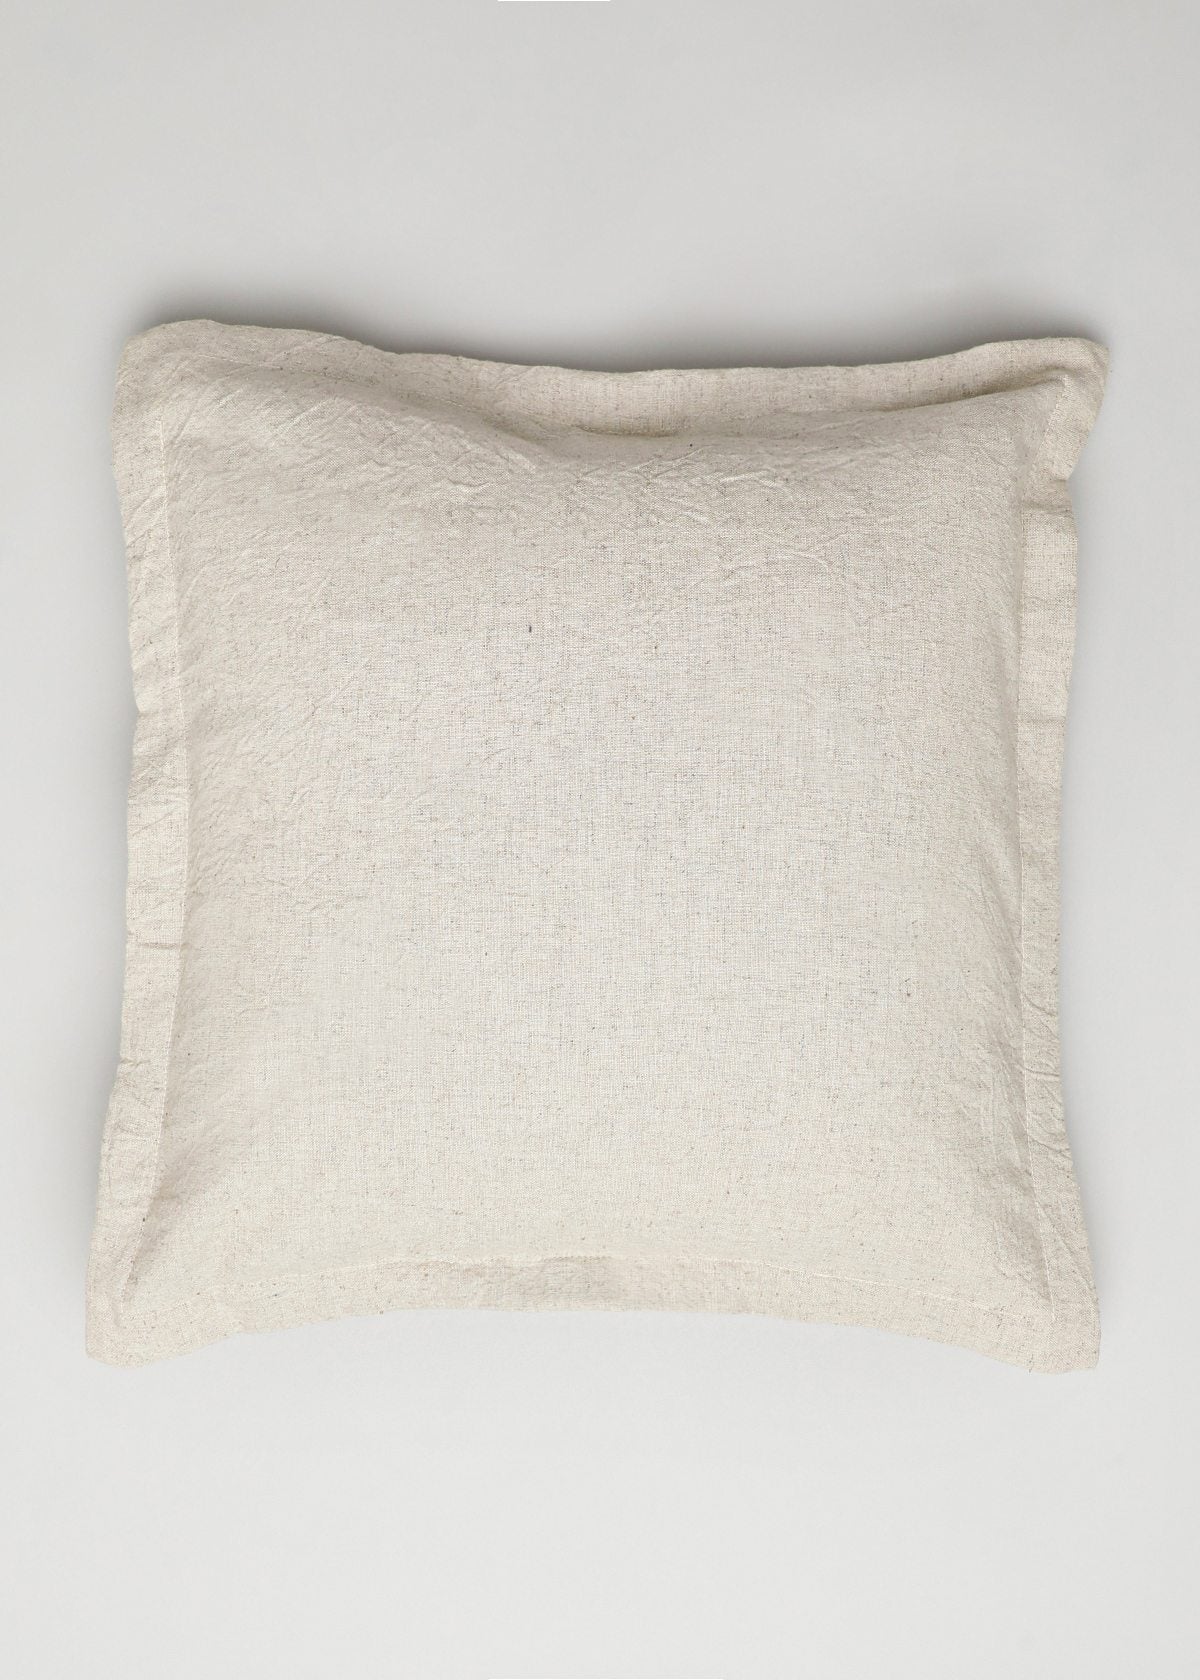 Solid Beige Linen plain cushion cover for sofa